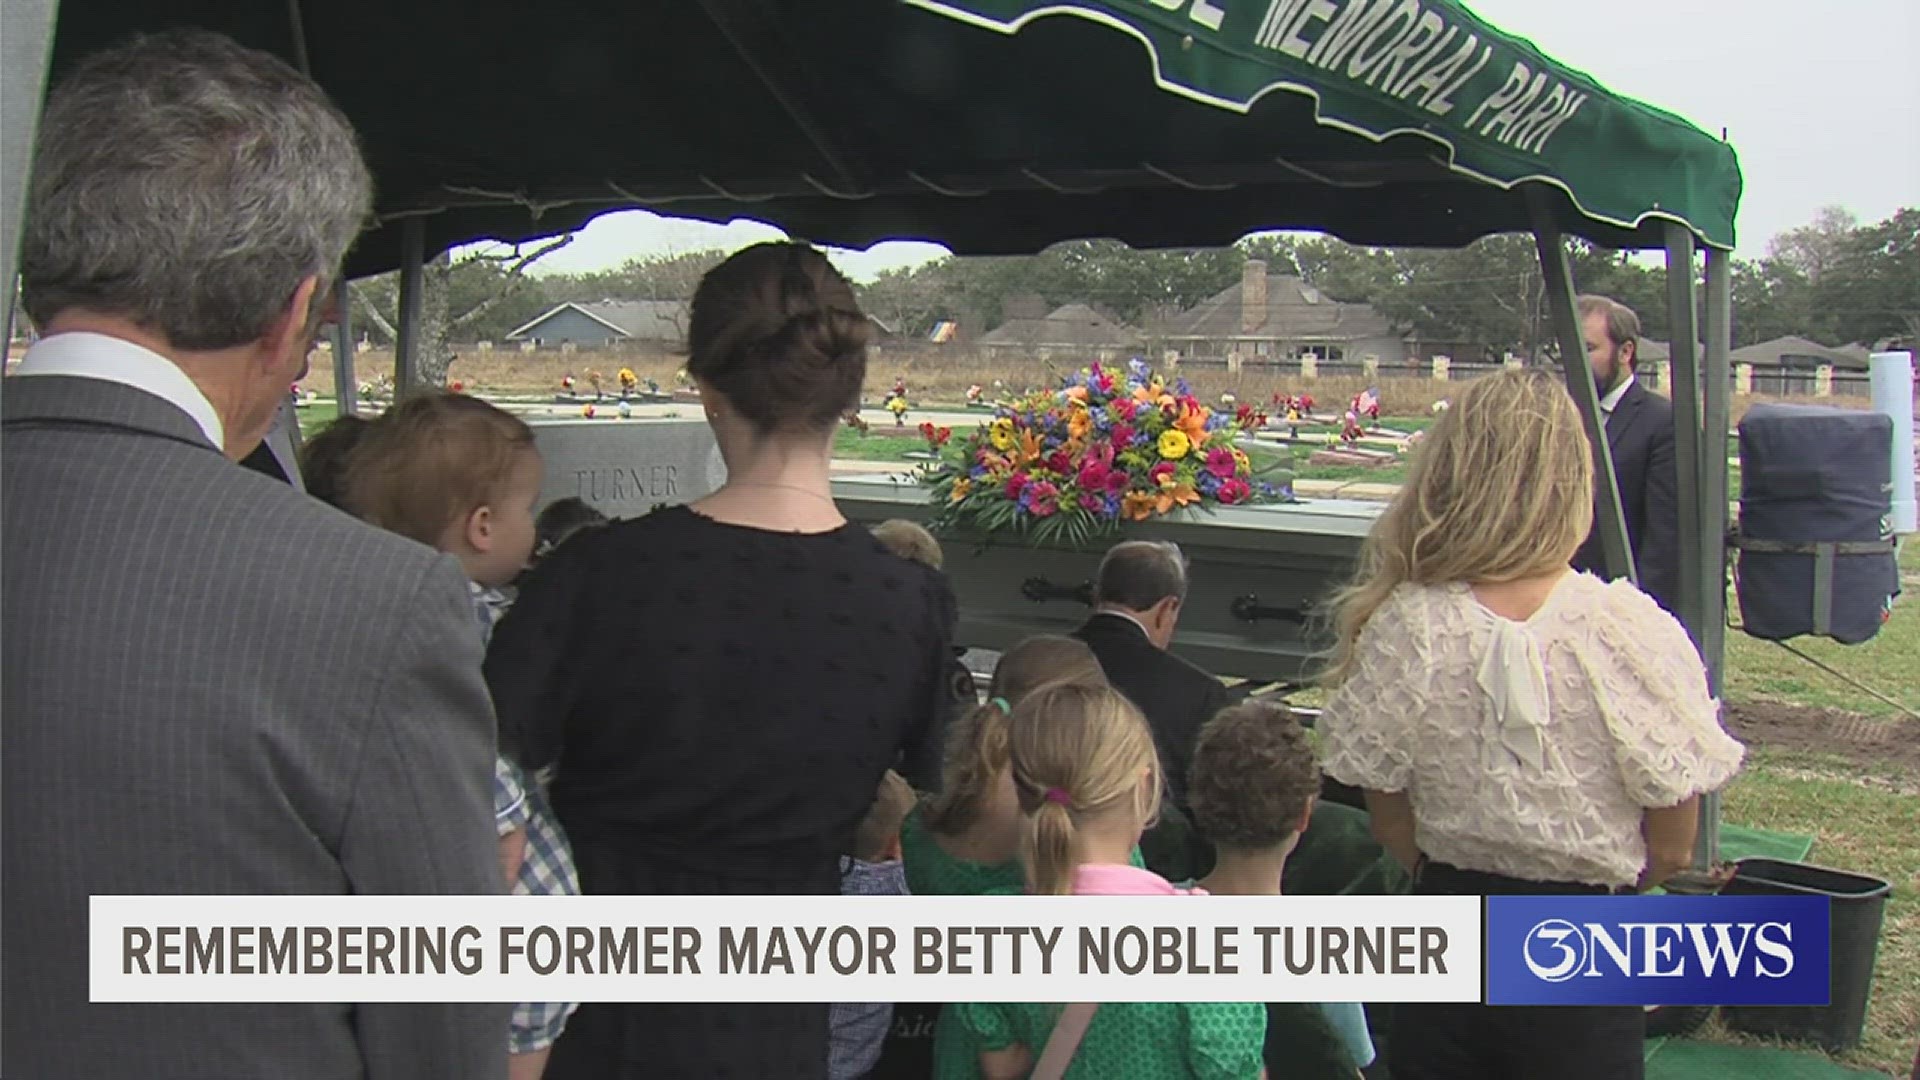 Turner died Jan. 26 at the age of 92. Her legacy lives on as the first woman to be elected as mayor.